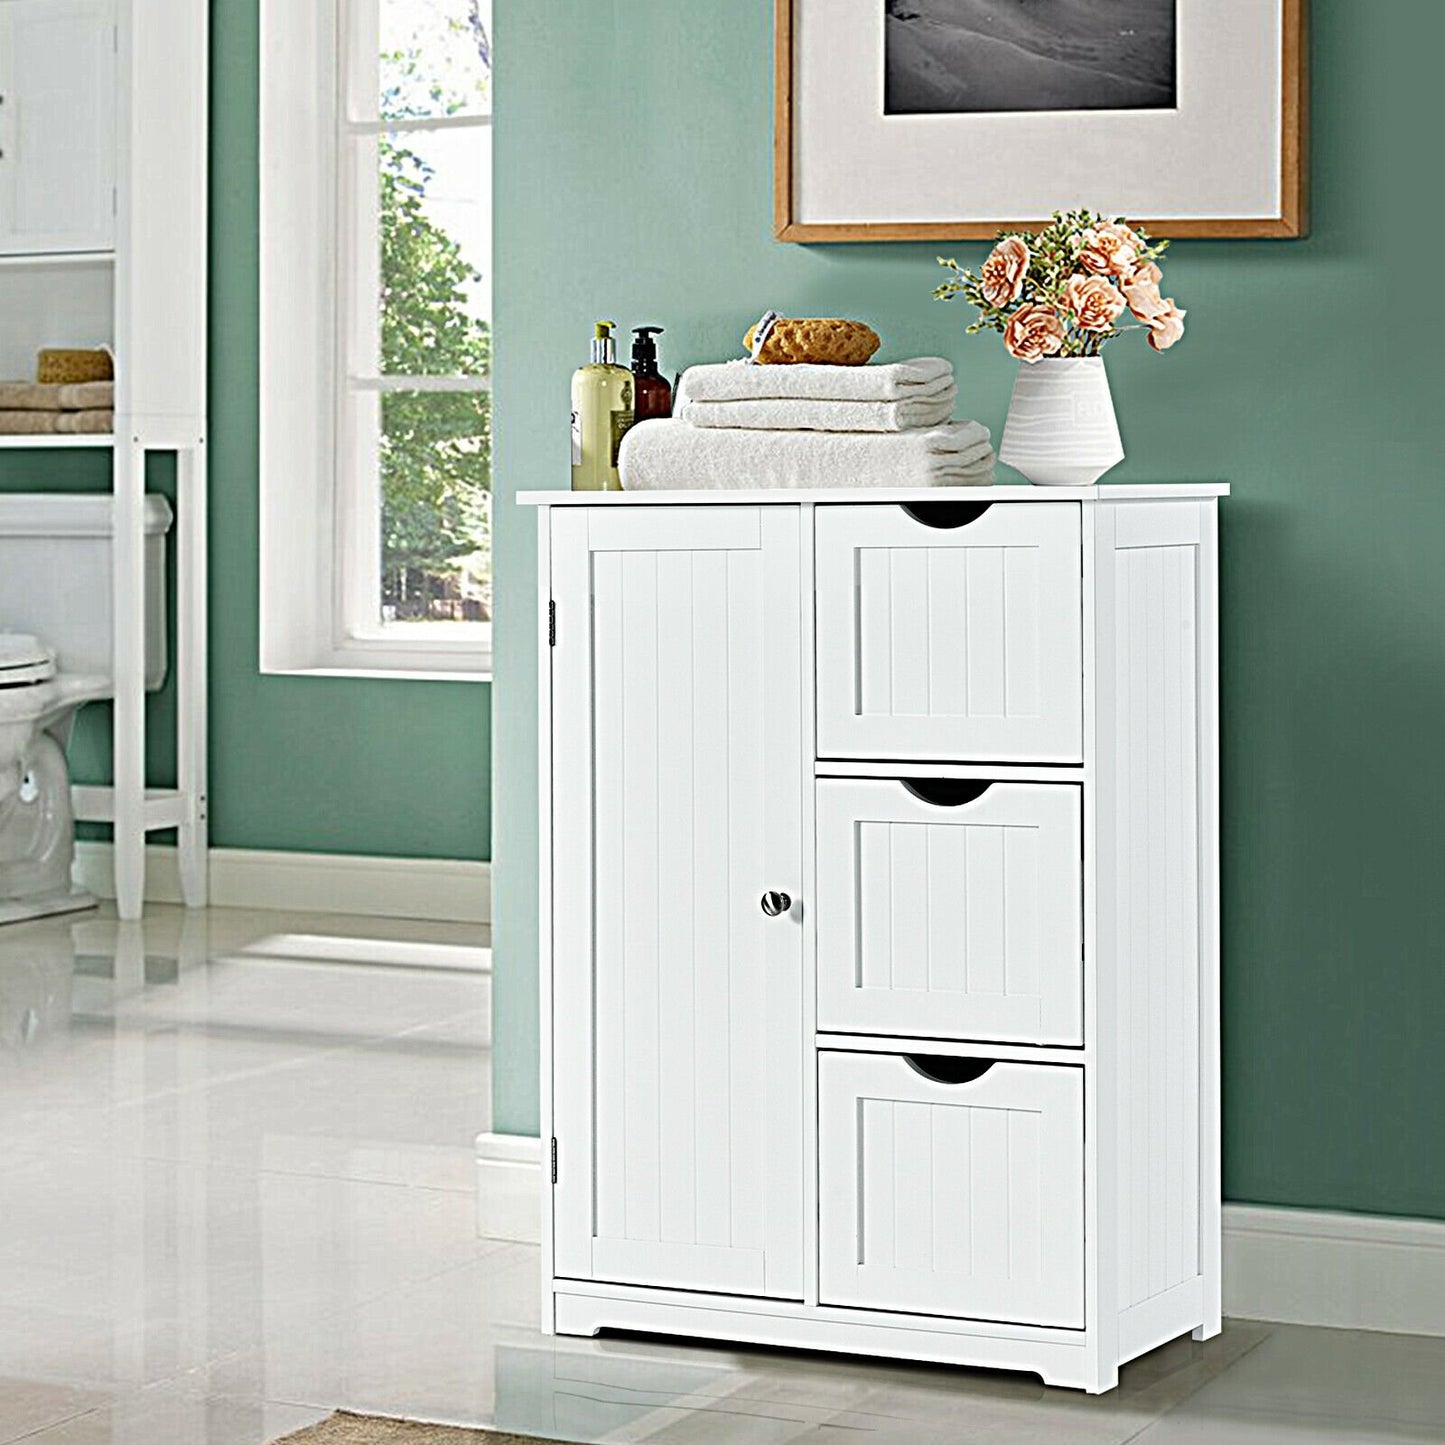 Bathroom Floor Cabinet Side Storage Cabinet with 3 Drawers and 1 Cupboard, White